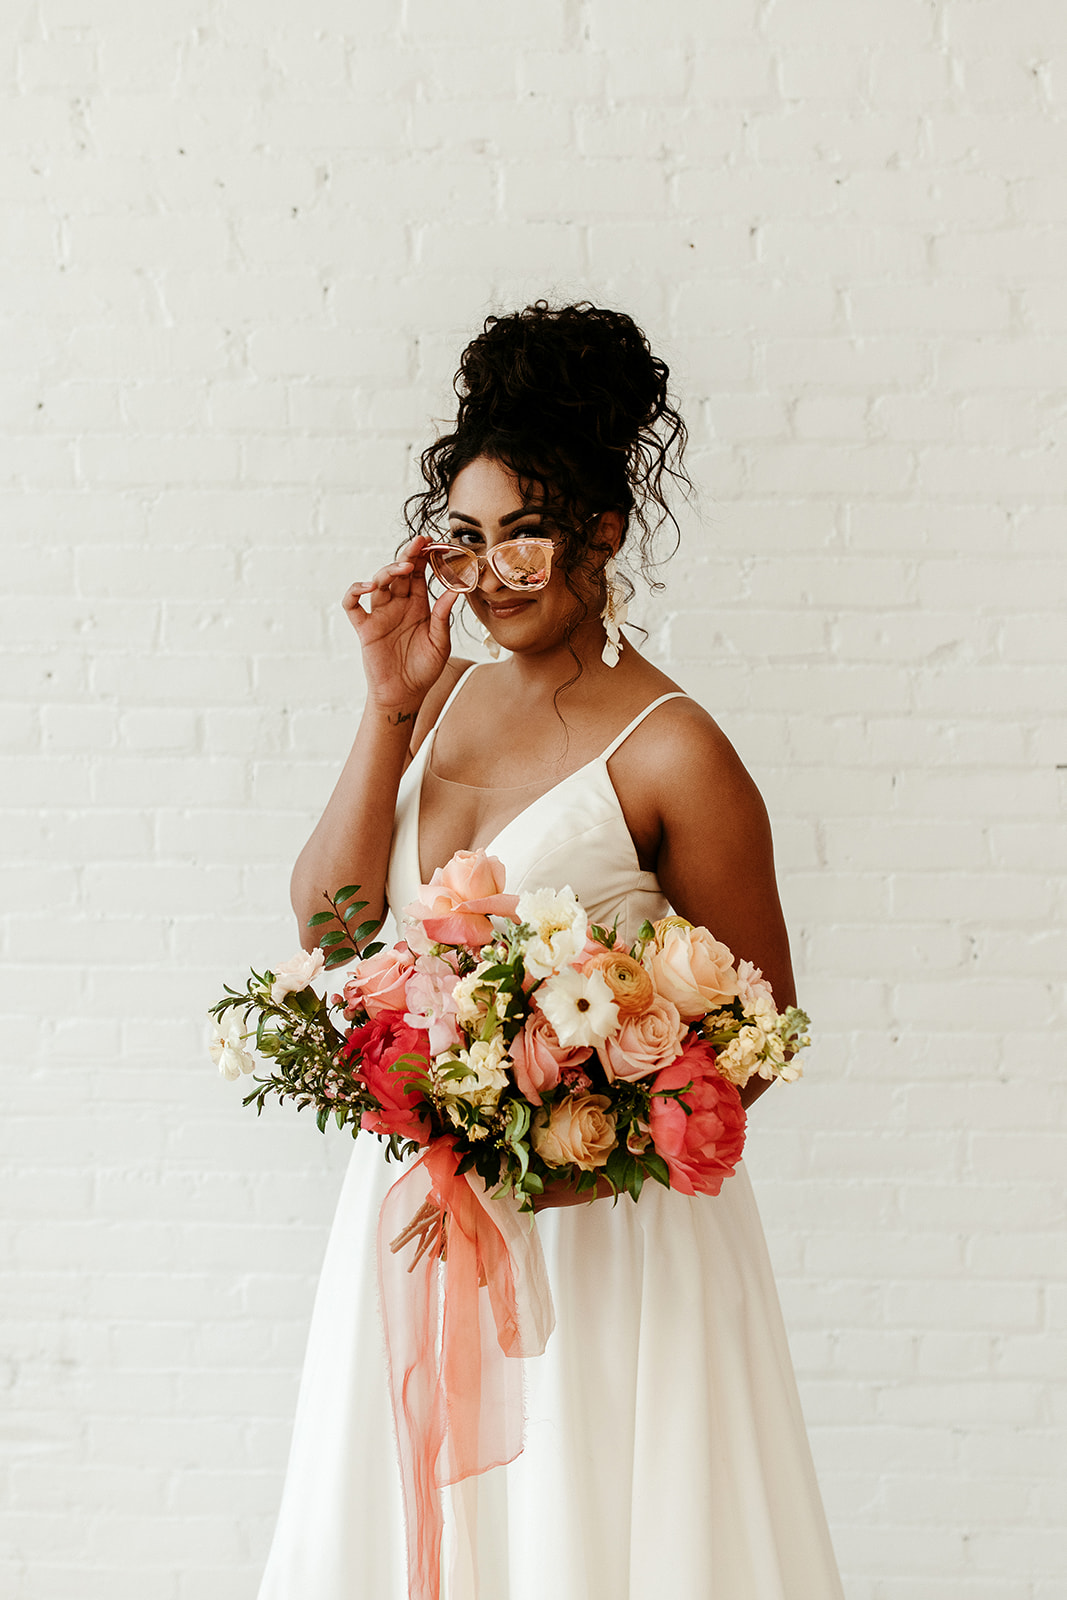 Bold bridal updo for the curly haired bride with bold citrus floral details